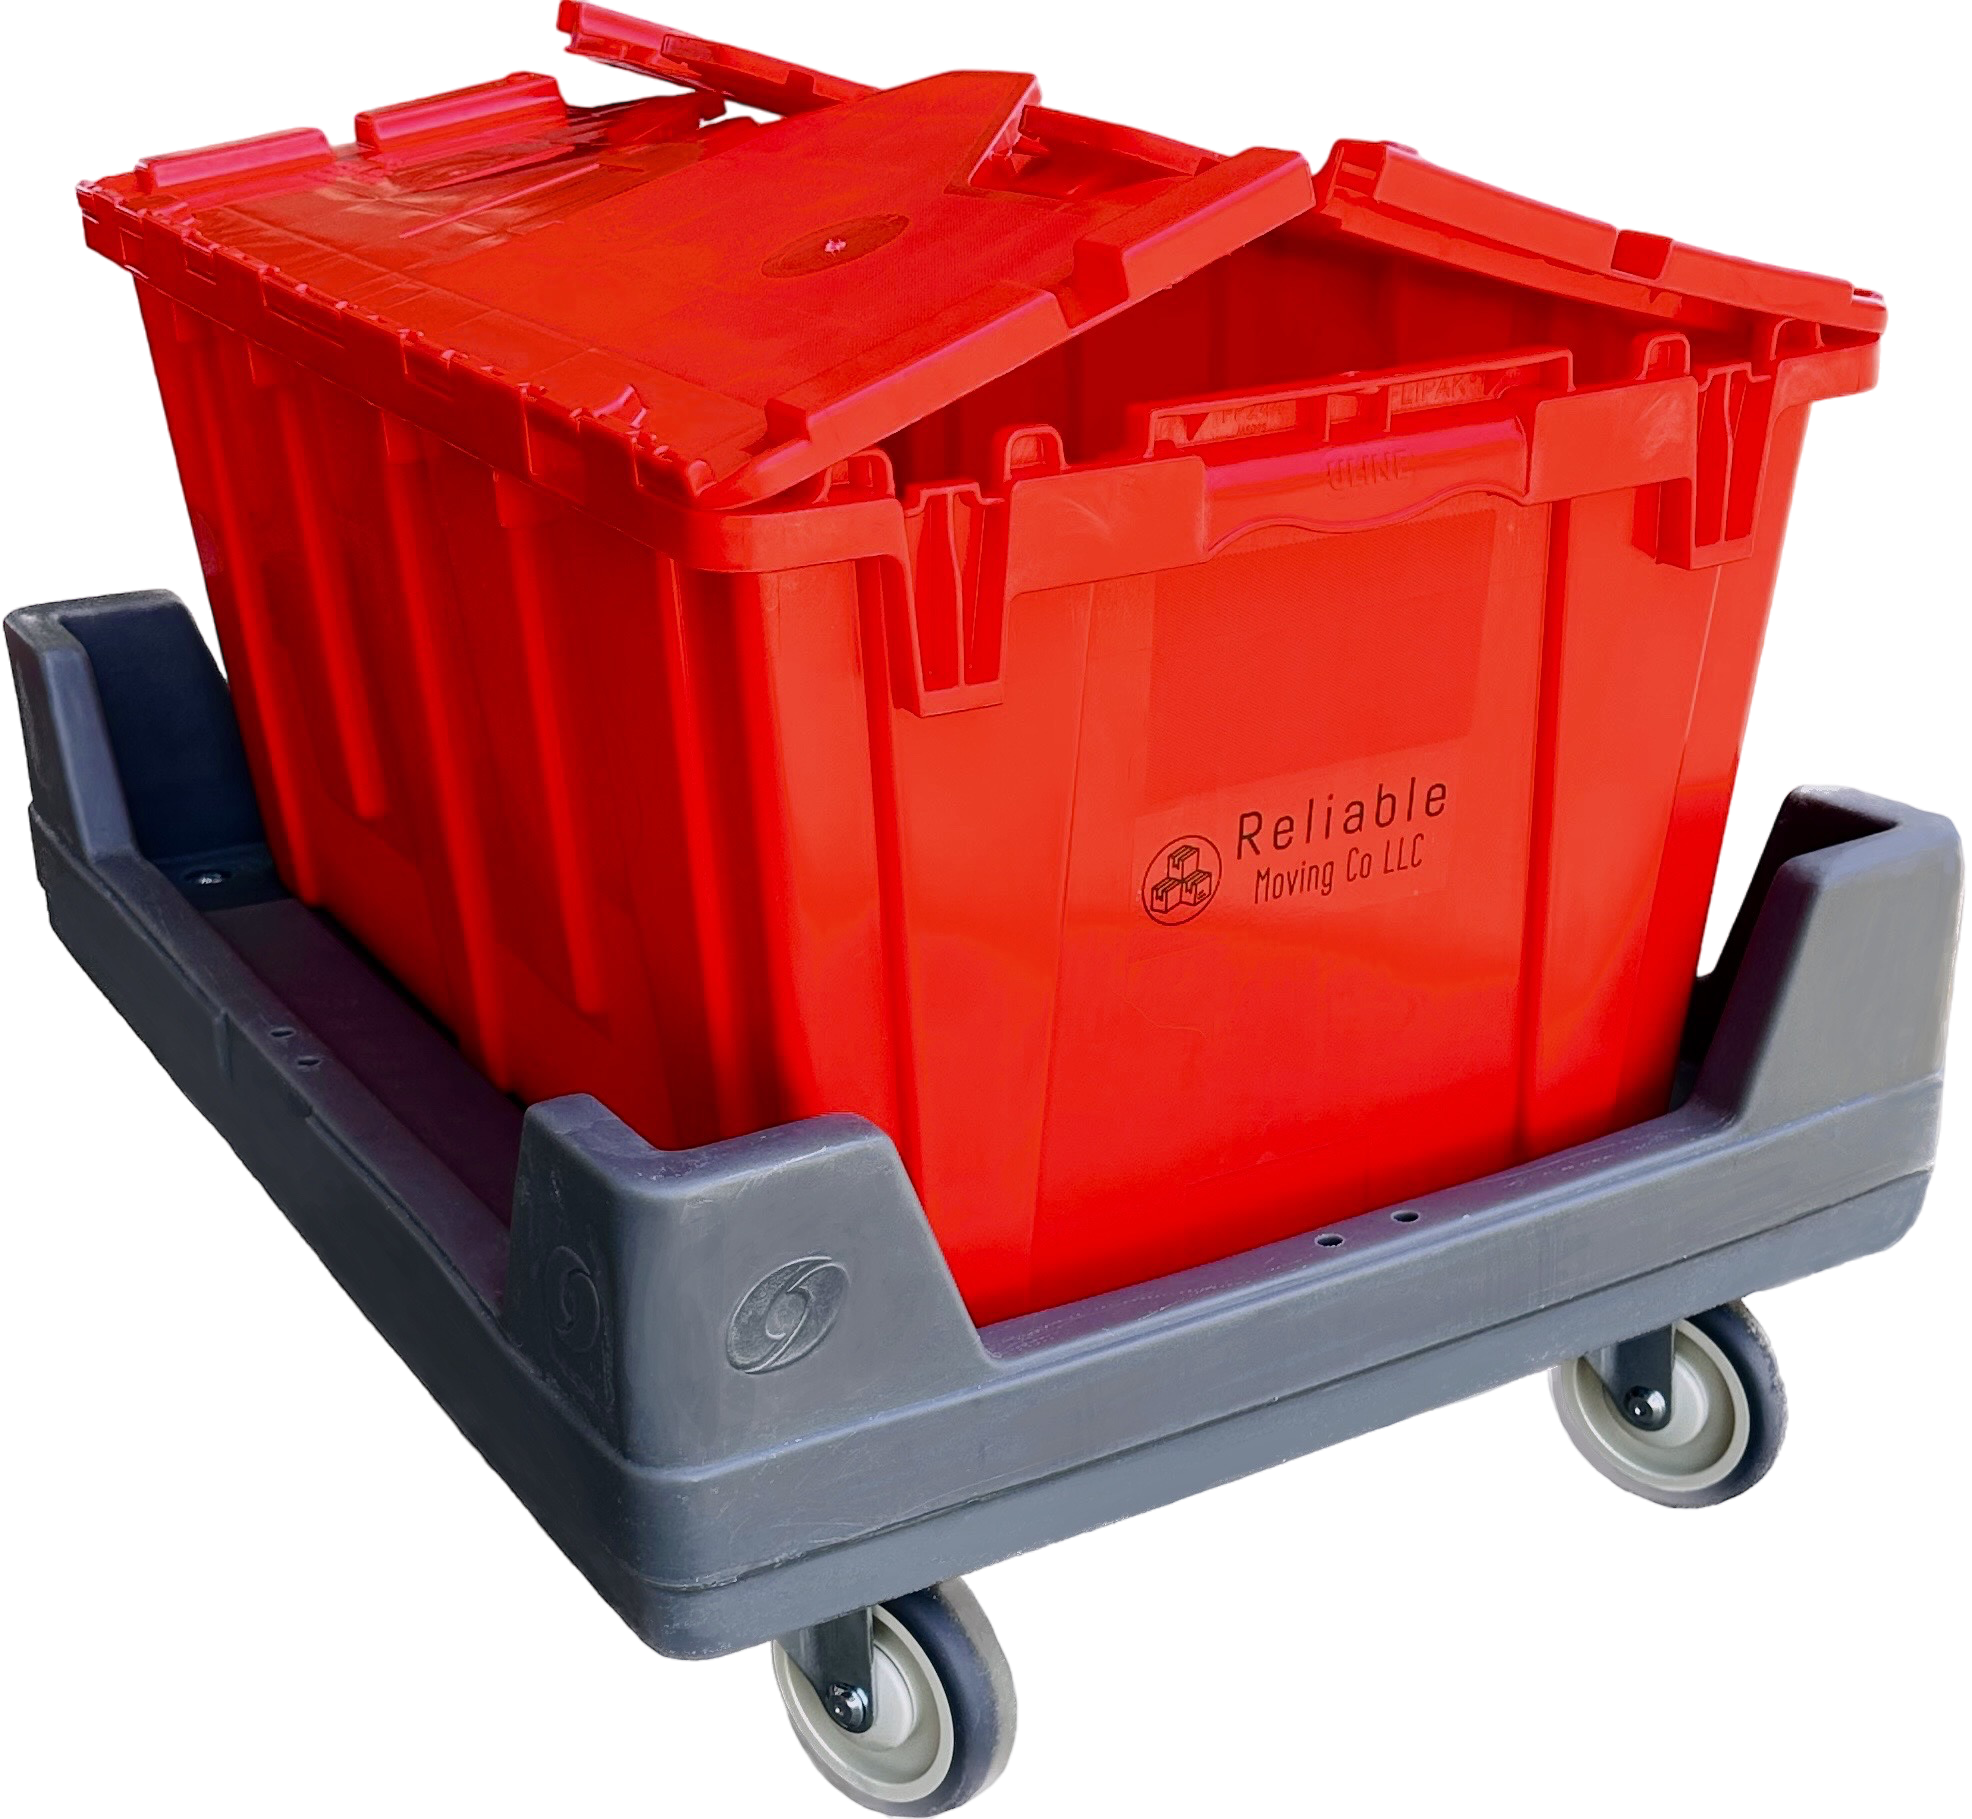 Rent Bins and Moving Totes - Sustainable and Affordable